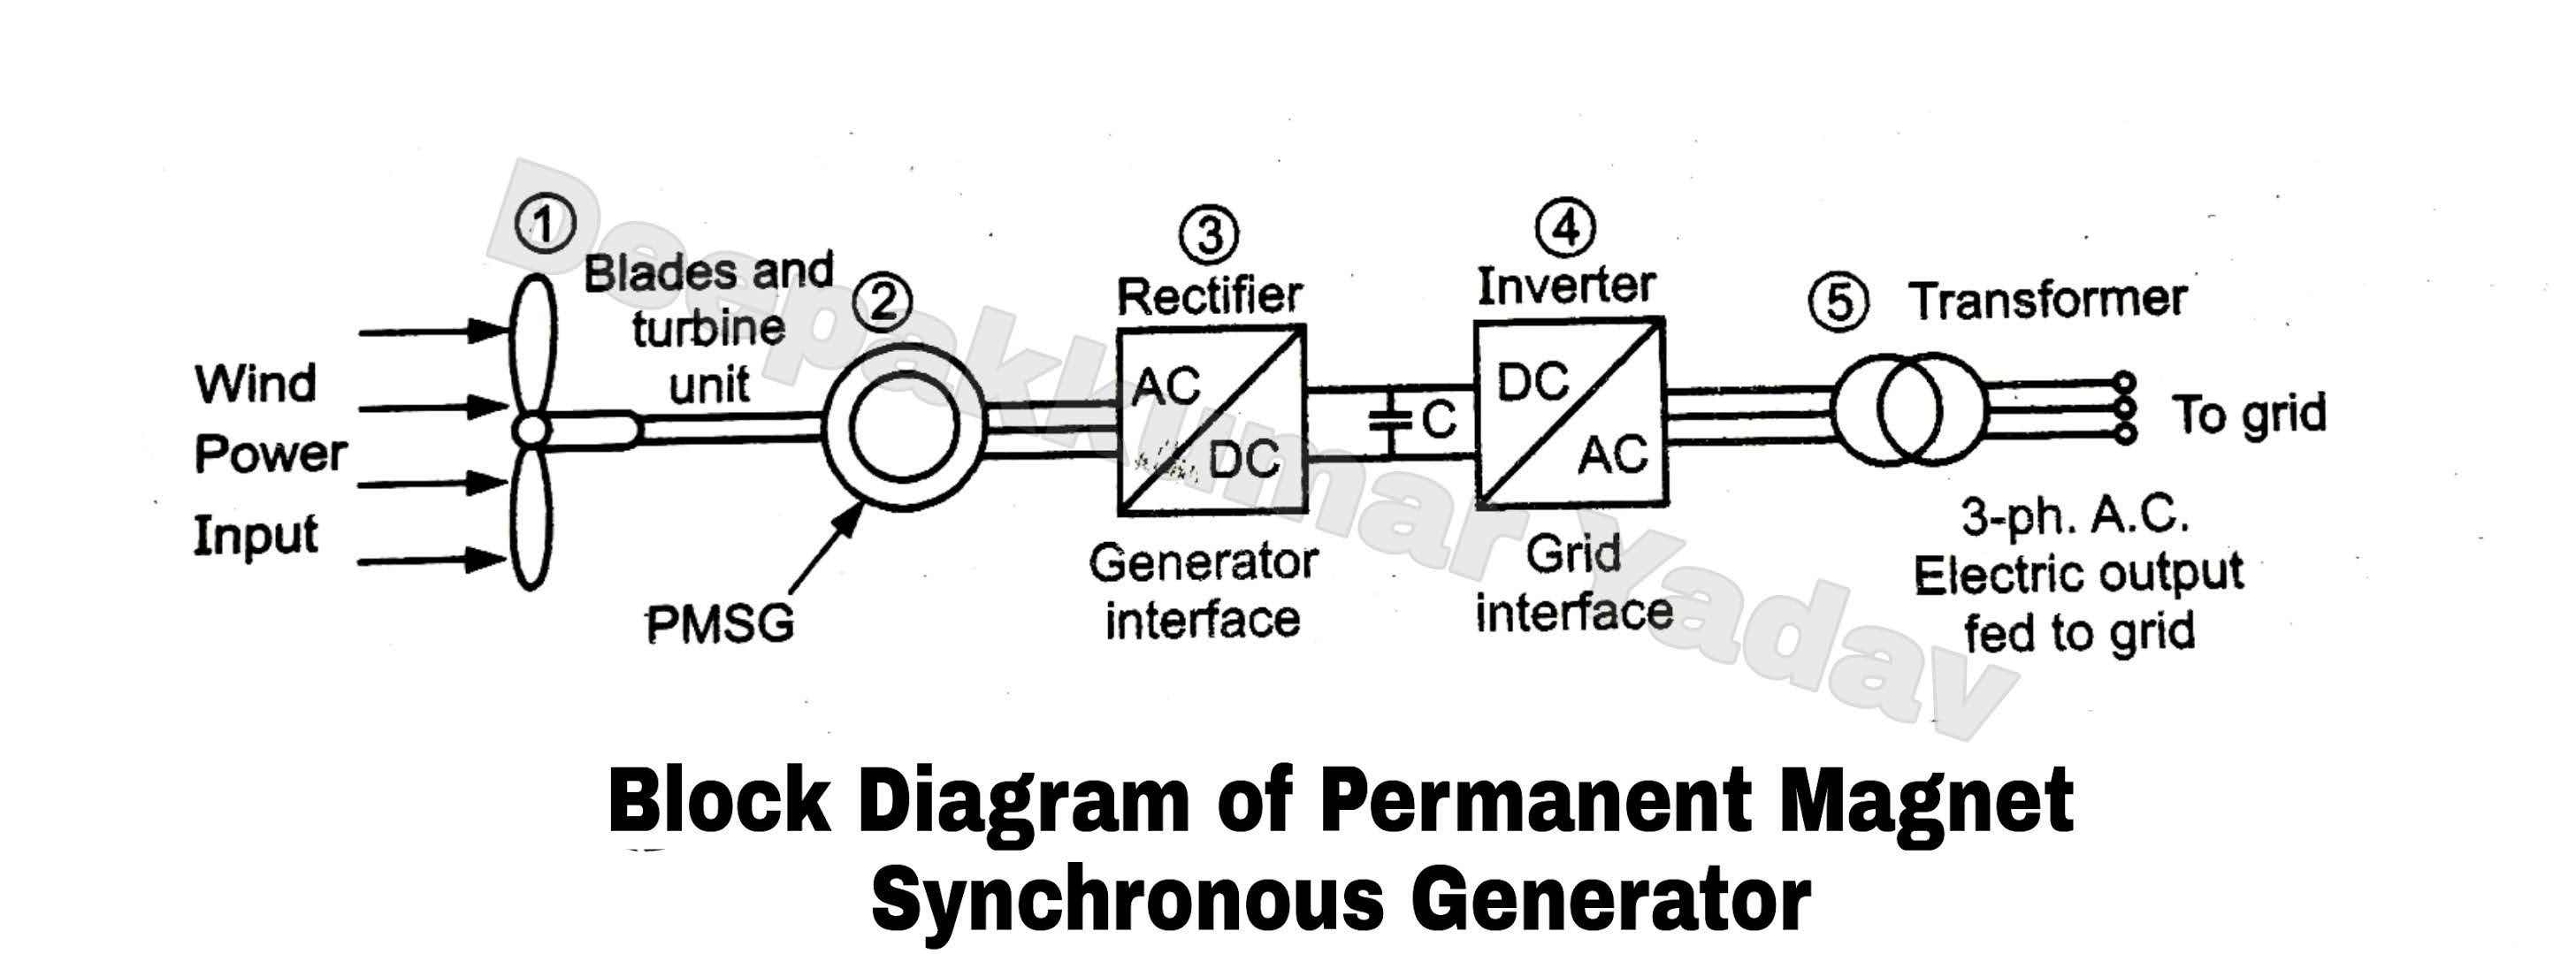 Permanent Synchronous (PMSG) in Wind Power Plant